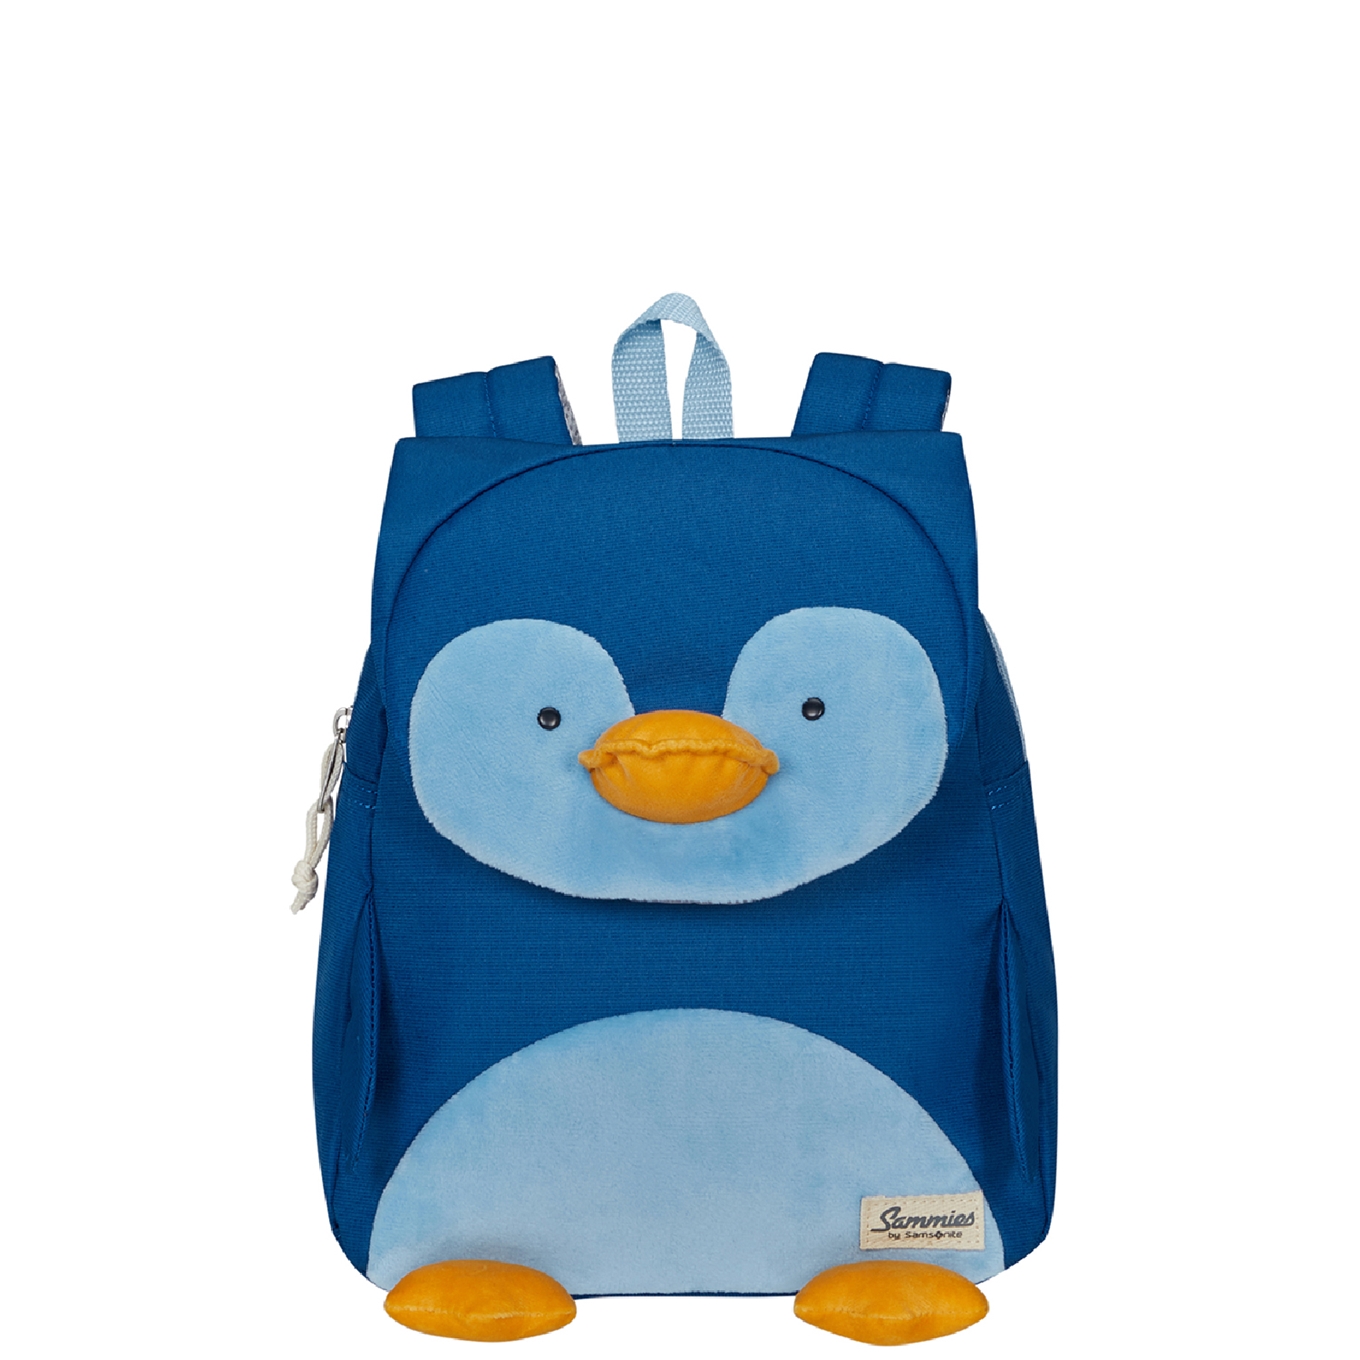 Rond en rond cijfer charme Sammies by Samsonite Happy Sammies Eco Backpack S pinguin peter |  Travelbags.nl